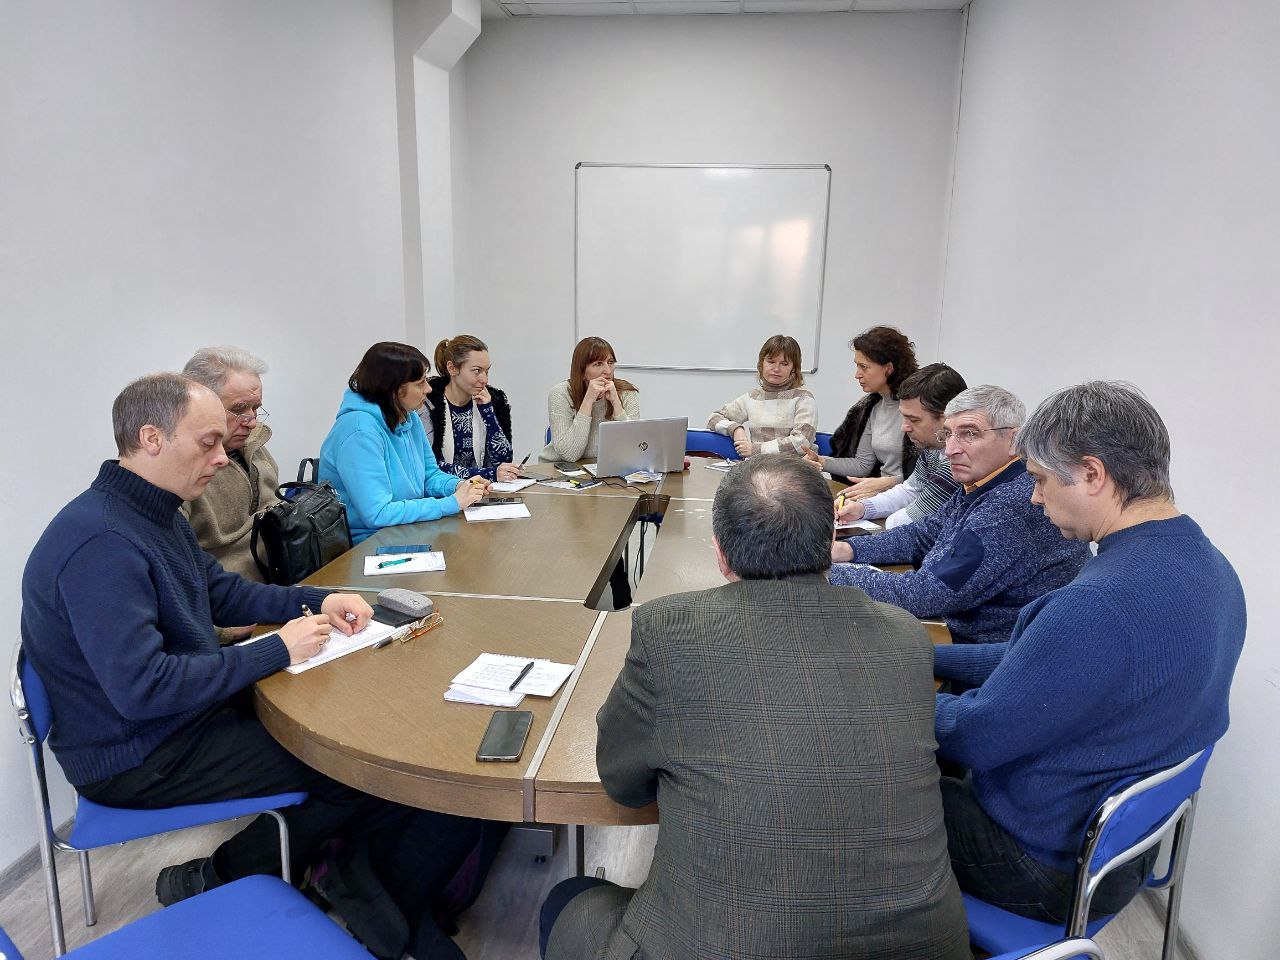 A meeting of representatives of the Technology Transfer Department was established.